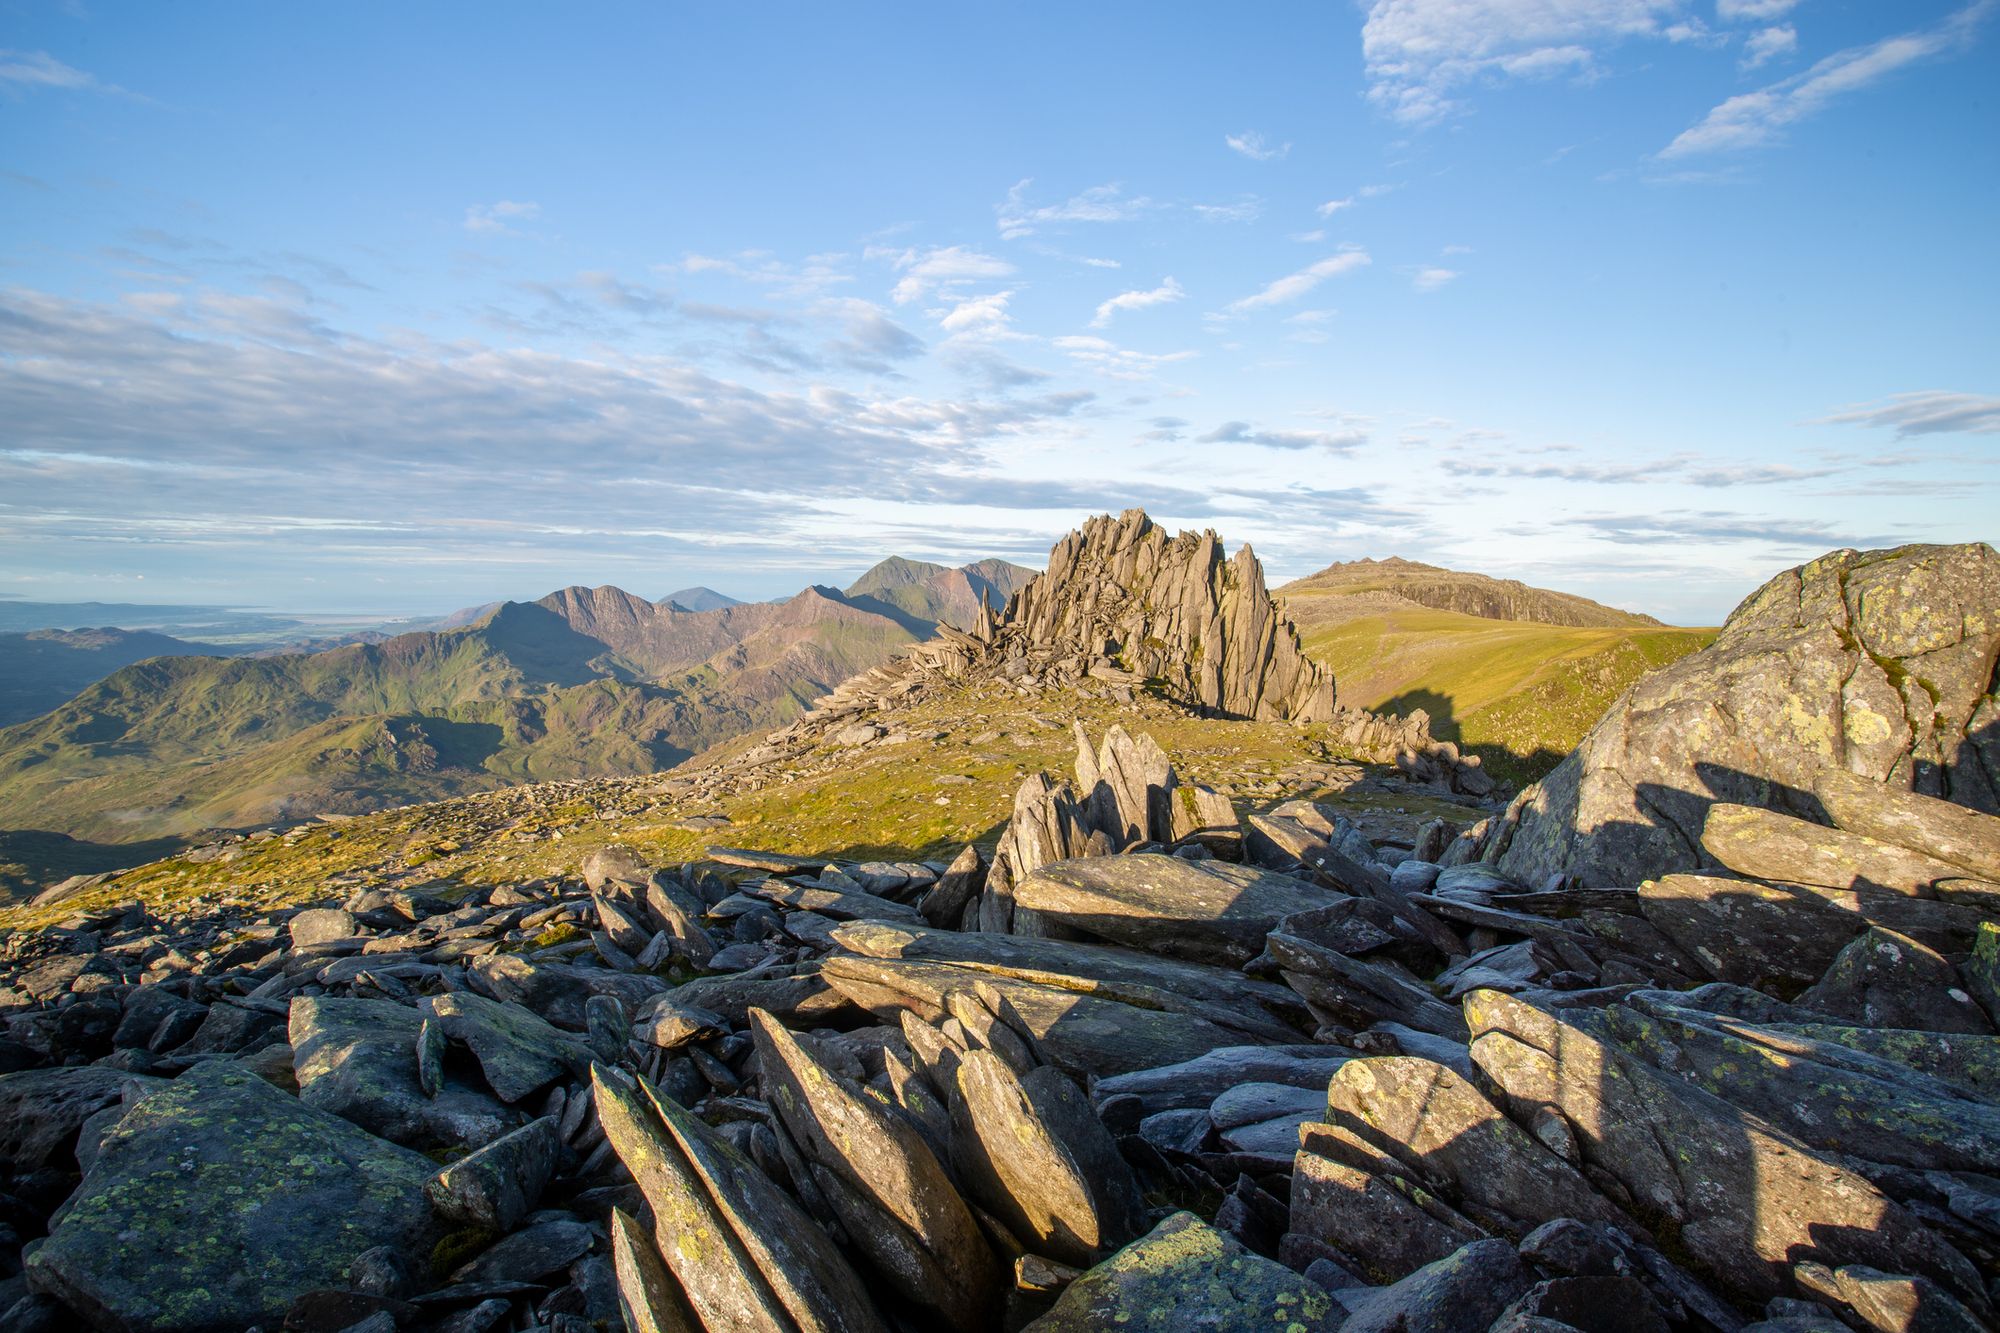 The Castle of the Winds, a rock formation between Glyder Fach and Glyder Fawr in Snowdonia National Park.